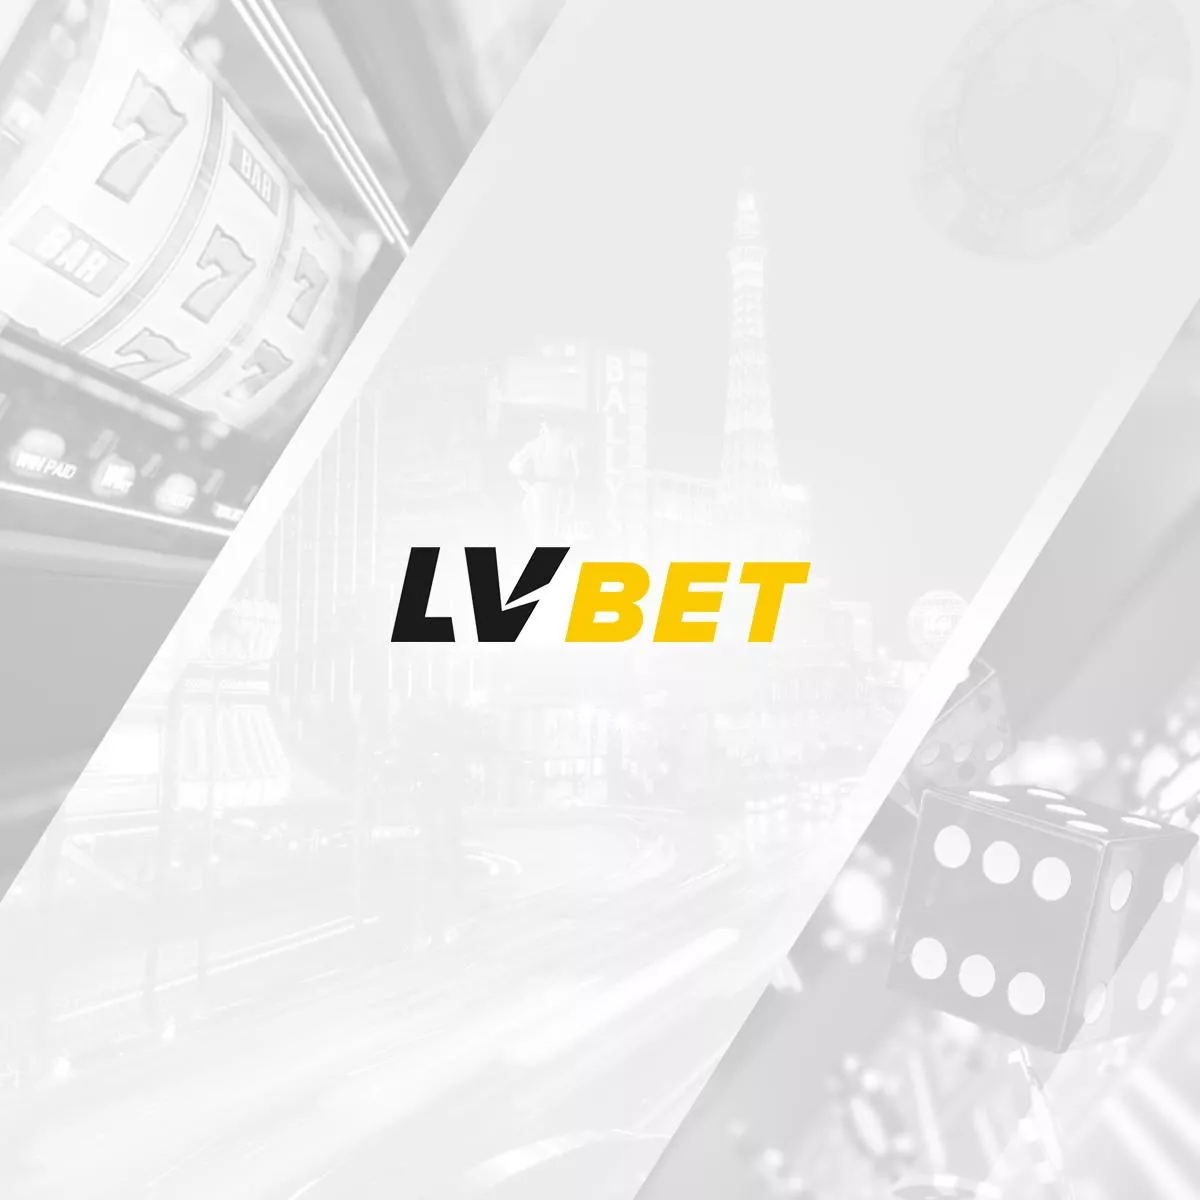 lvbet casinospiele For Sale – How Much Is Yours Worth?